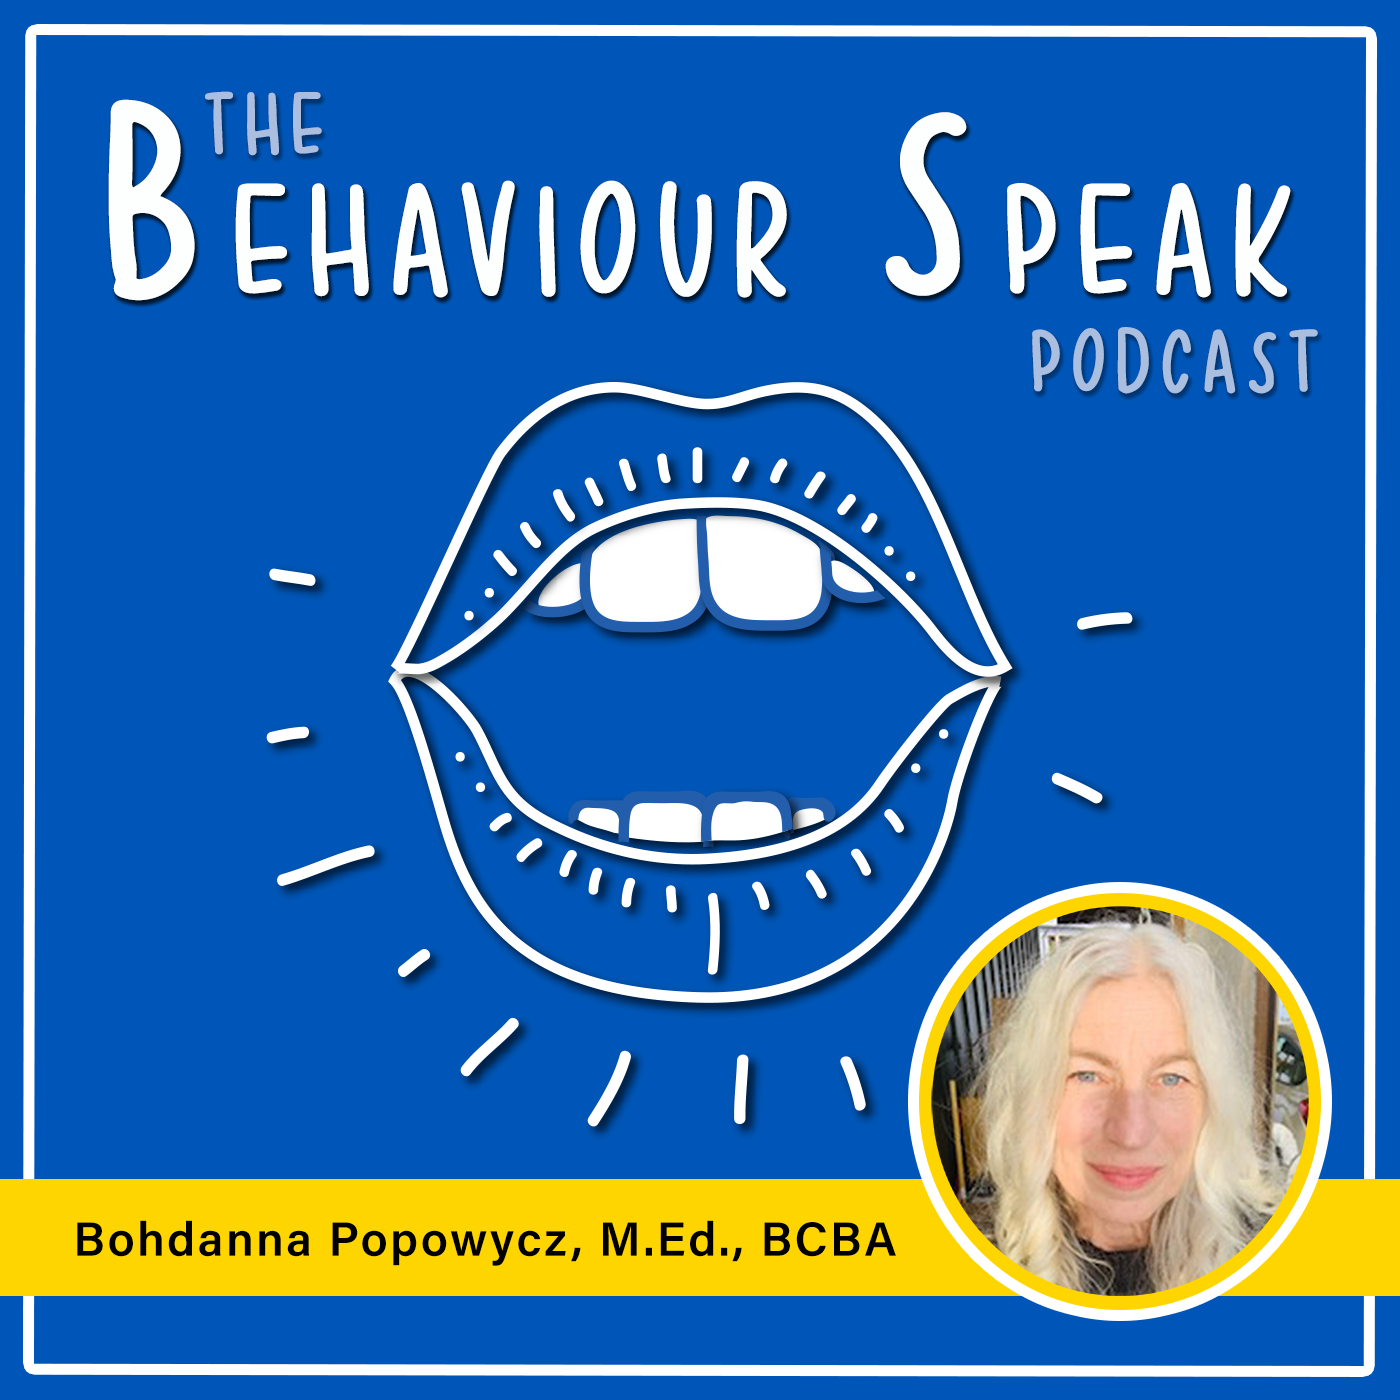 Episode 32 - Special Series on Supporting Refugees from Ukraine Episode 2: Tips on Providing Direct Support to Ukrainian Refugee Families with Autistic Children with Bohdanna Popowycz, M.Ed., BCBA